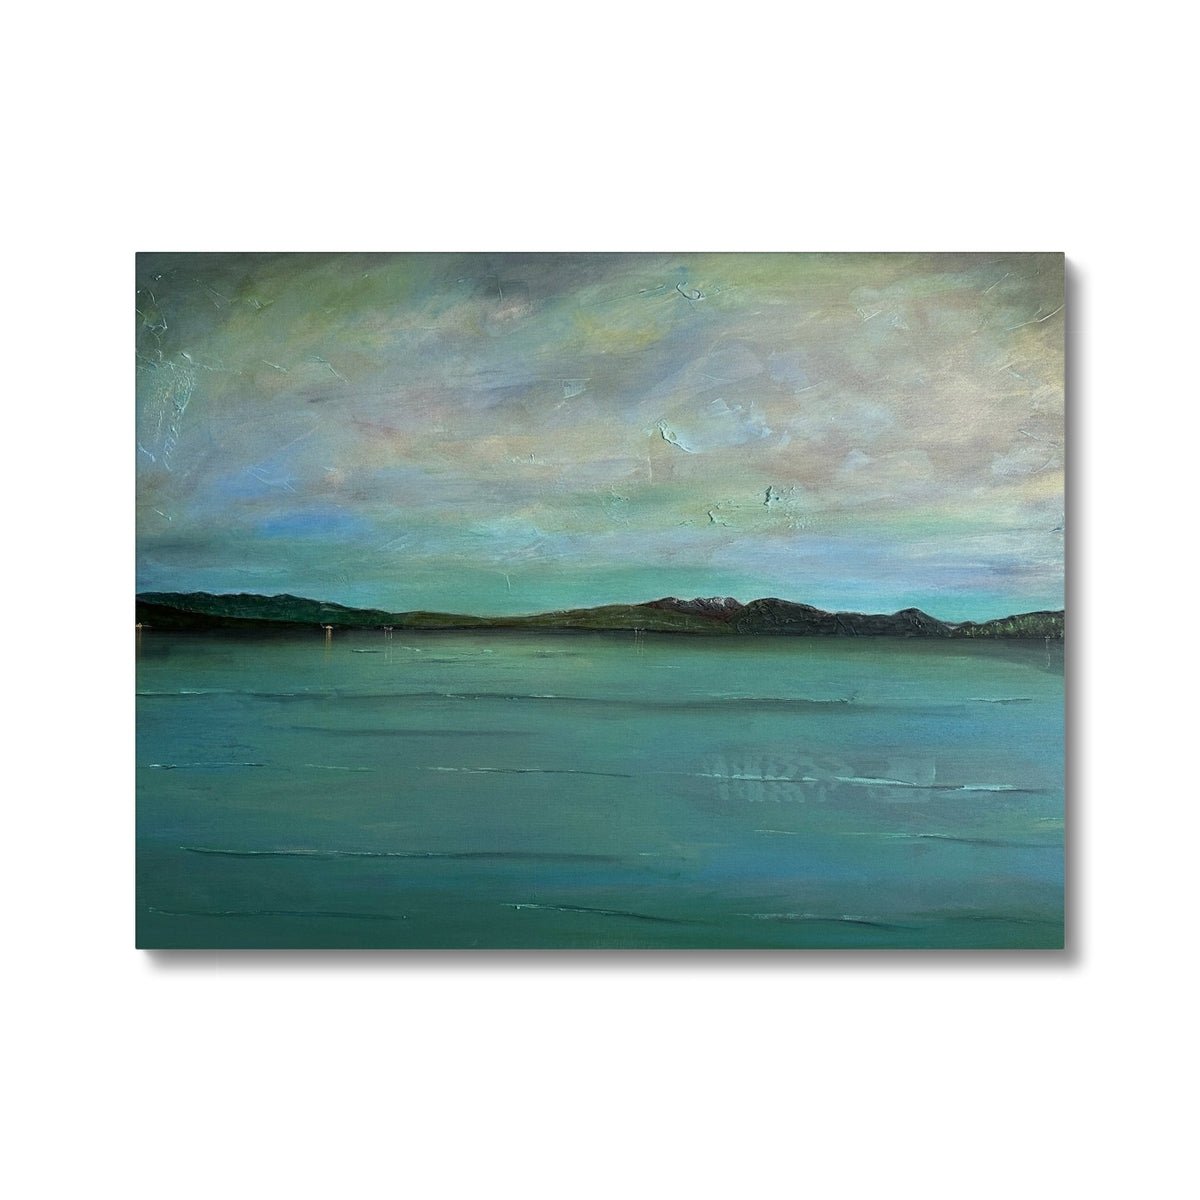 An Emerald Loch Lomond Painting | Canvas From Scotland-Contemporary Stretched Canvas Prints-Scottish Lochs & Mountains Art Gallery-24"x18"-Paintings, Prints, Homeware, Art Gifts From Scotland By Scottish Artist Kevin Hunter